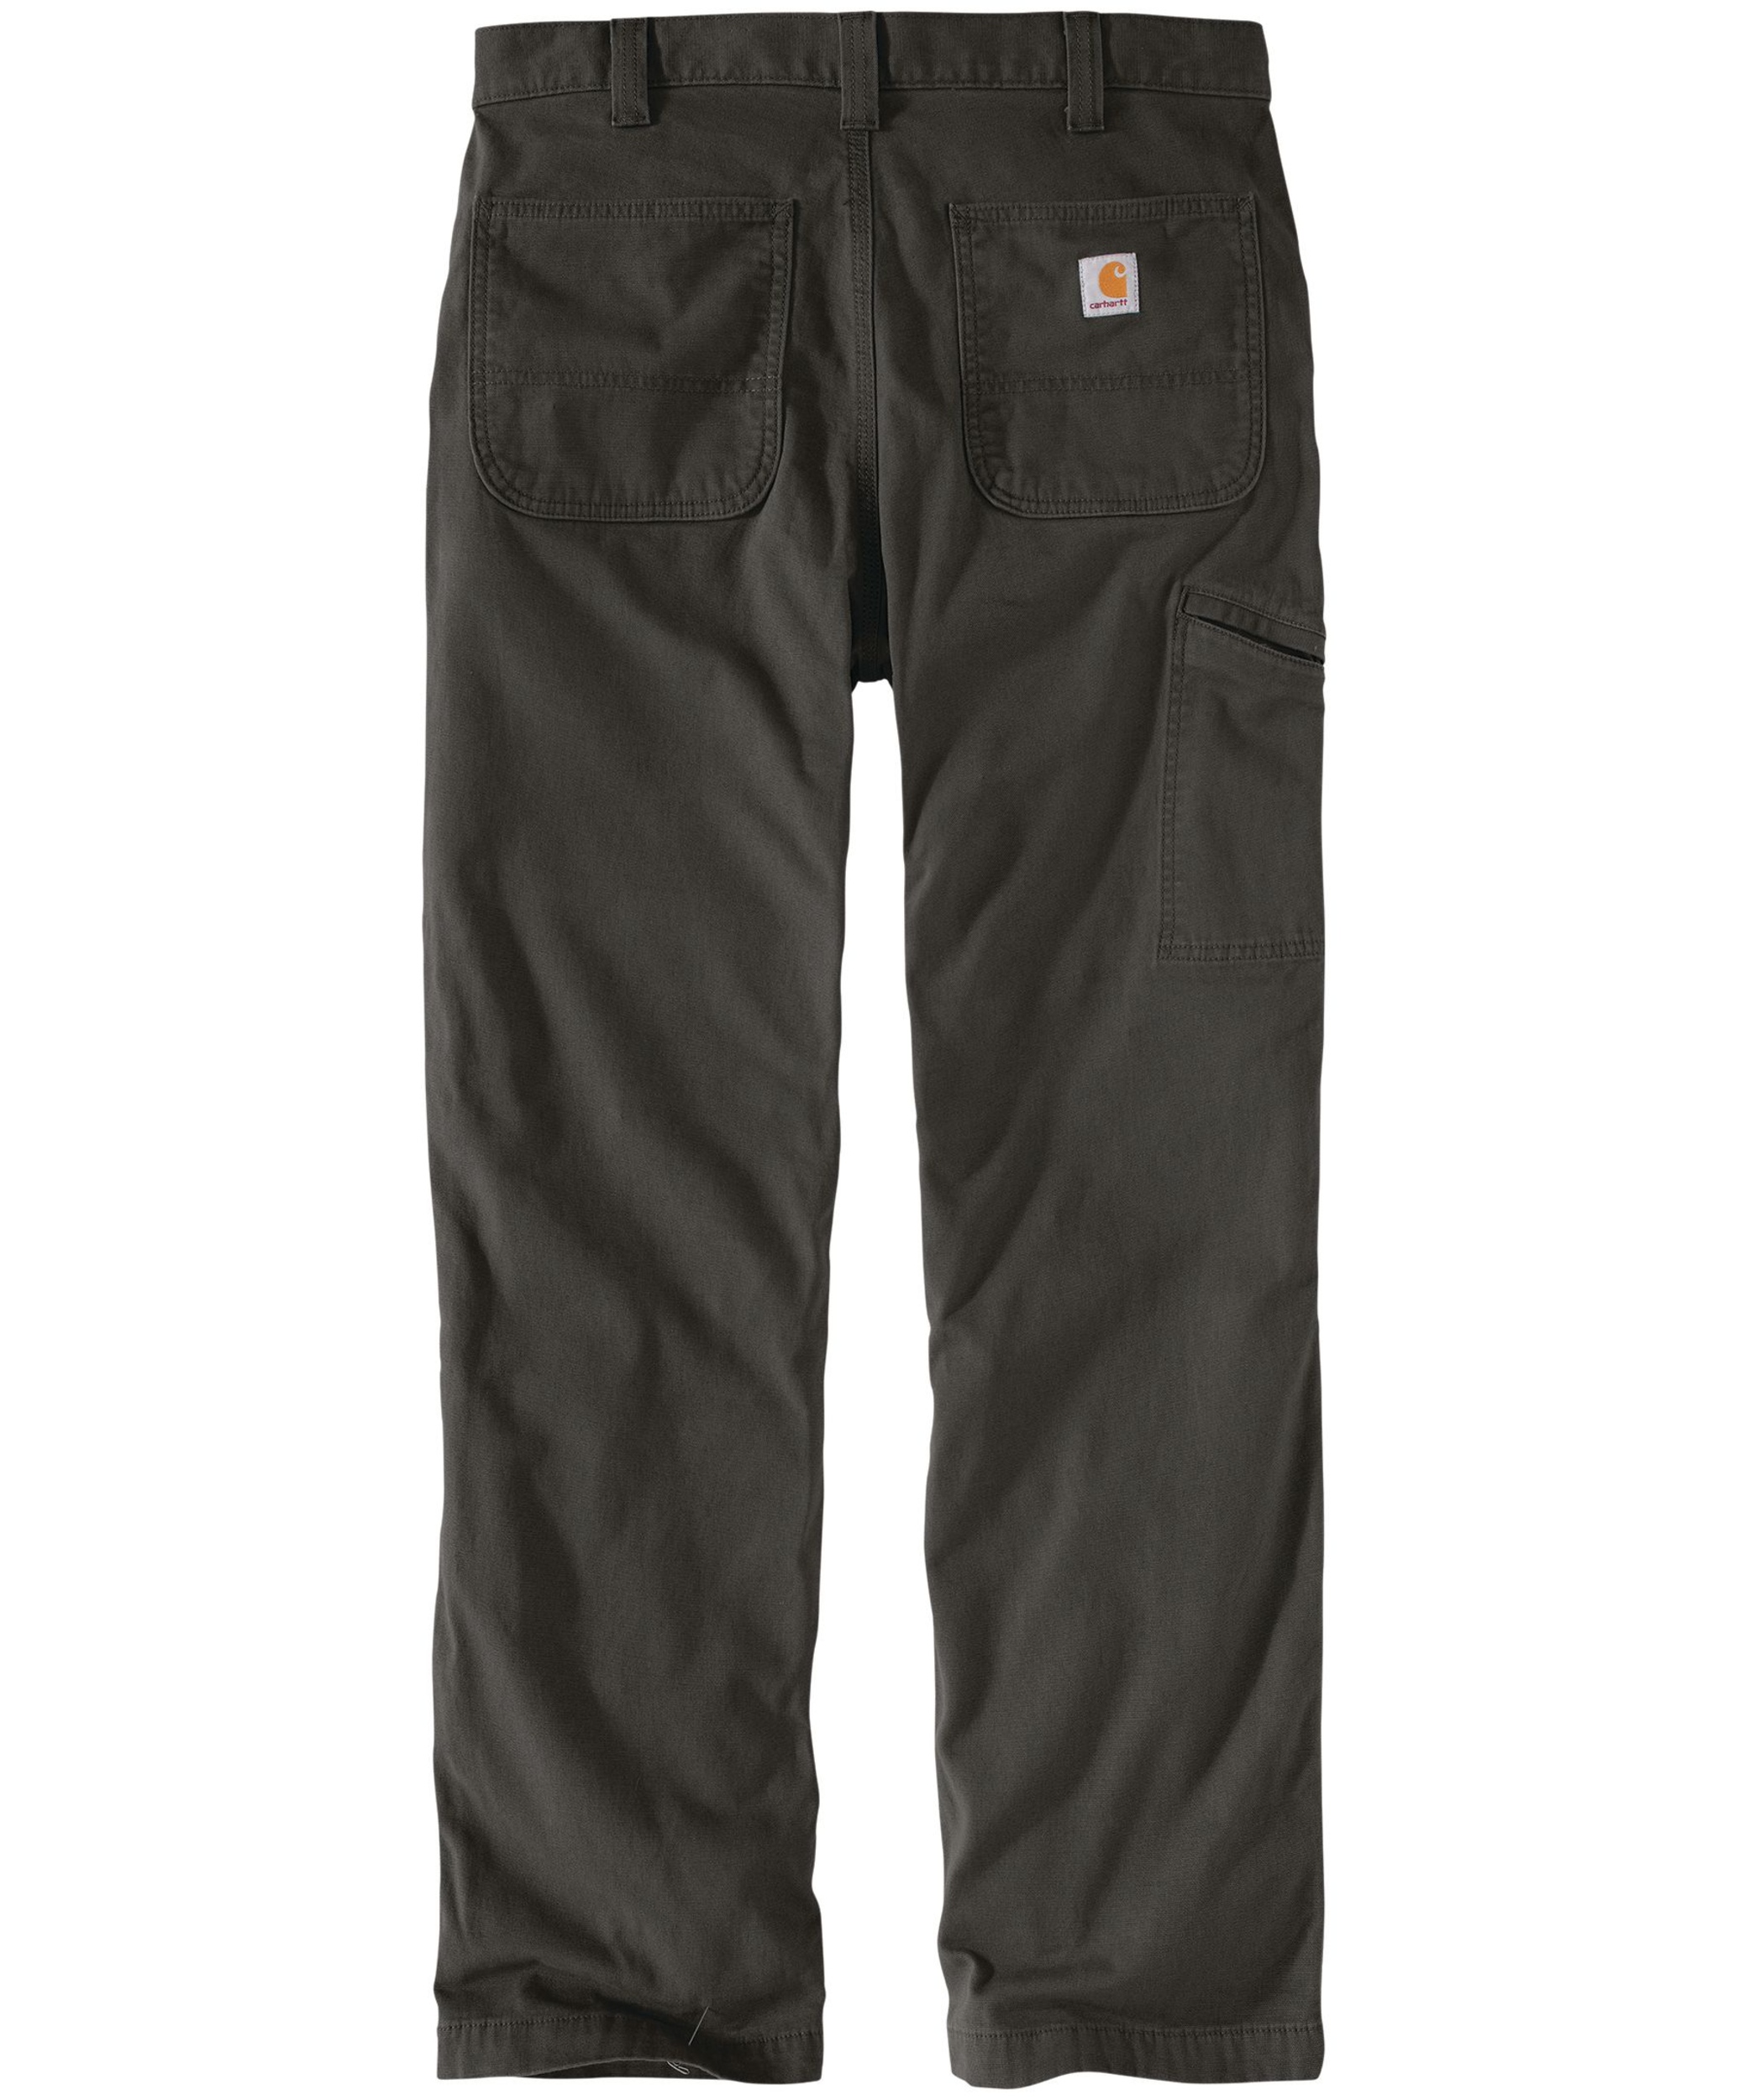 Carhartt Rugged Flex Rigby Dungaree Knit Lined Relaxed Fit Work Pants ...